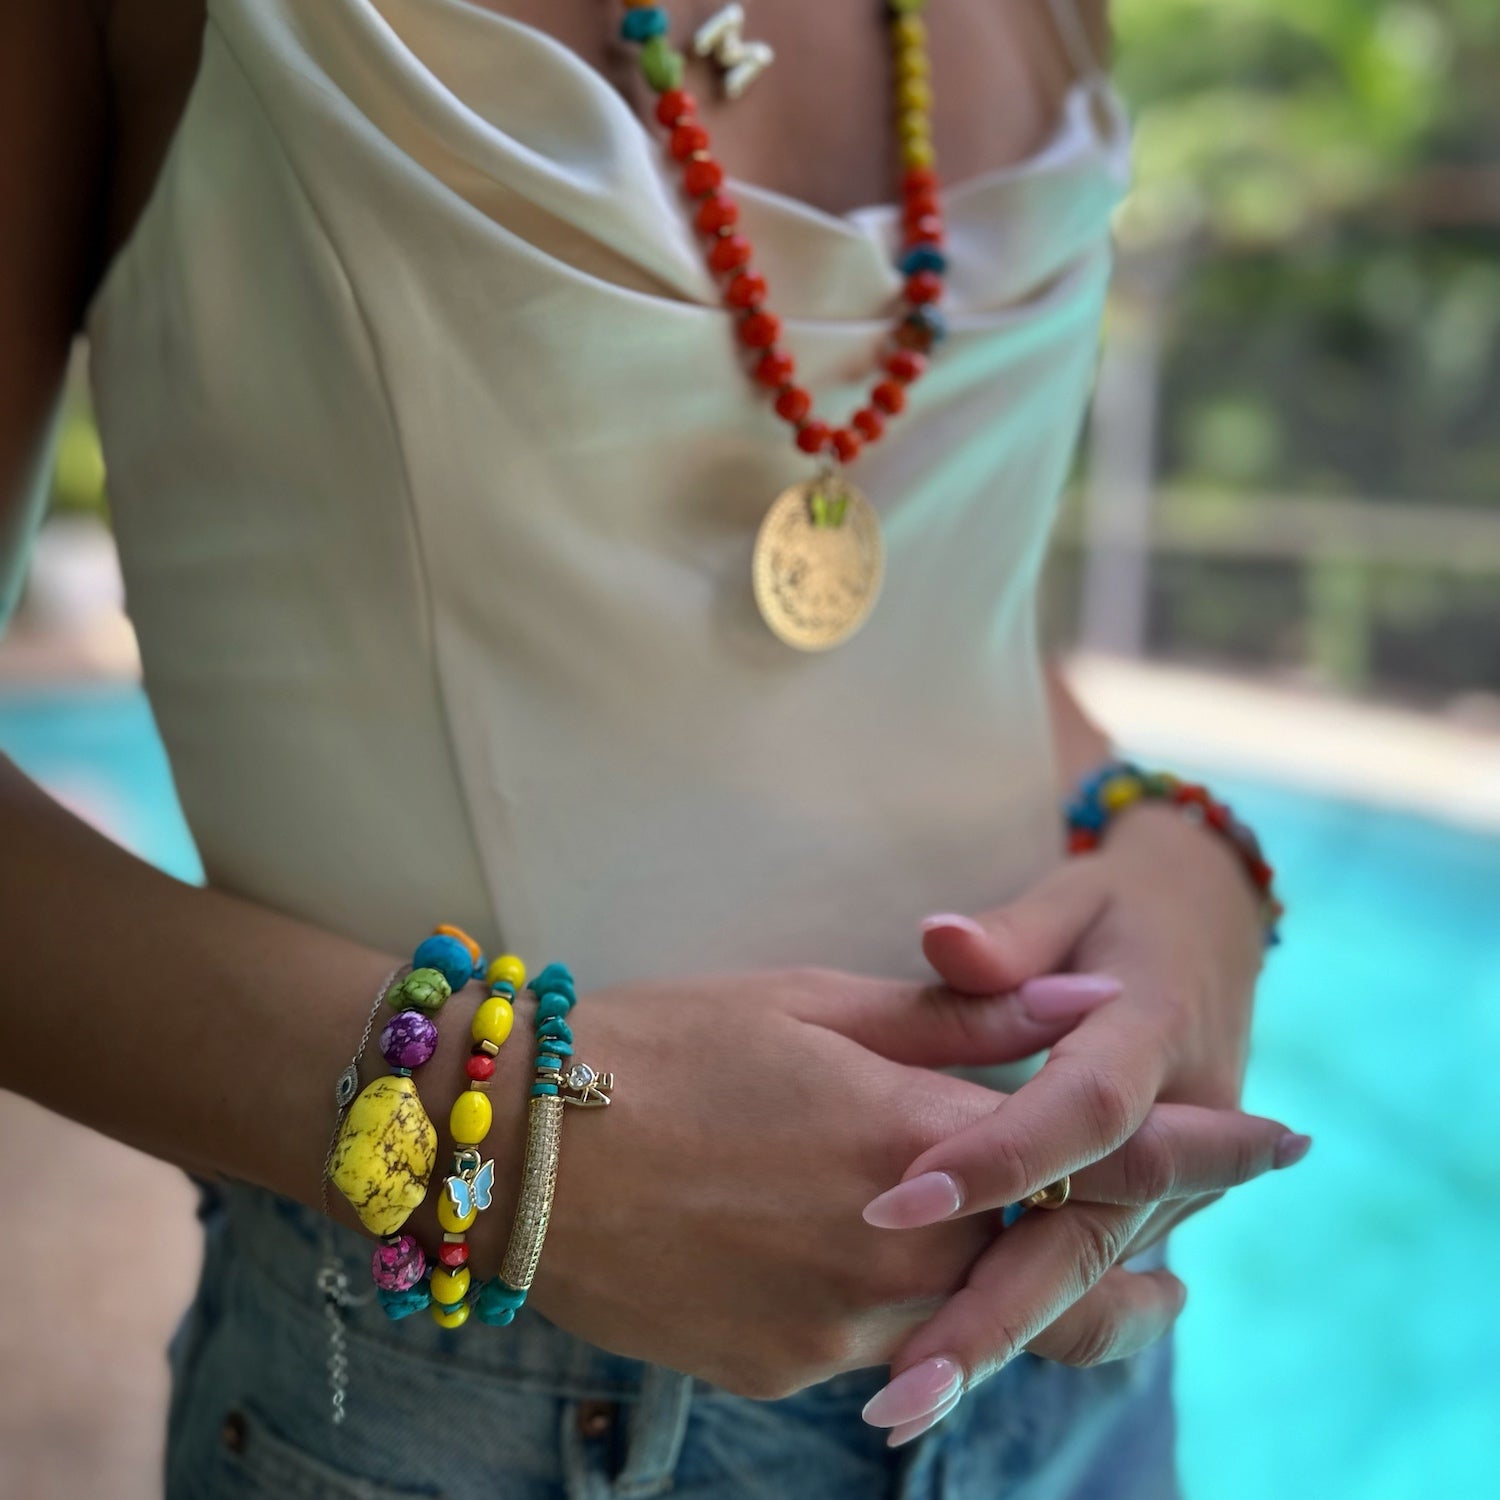 See how the Rainbow Butterfly Bracelet beautifully adorns the hand model's wrist, exuding a sense of whimsy and elegance.